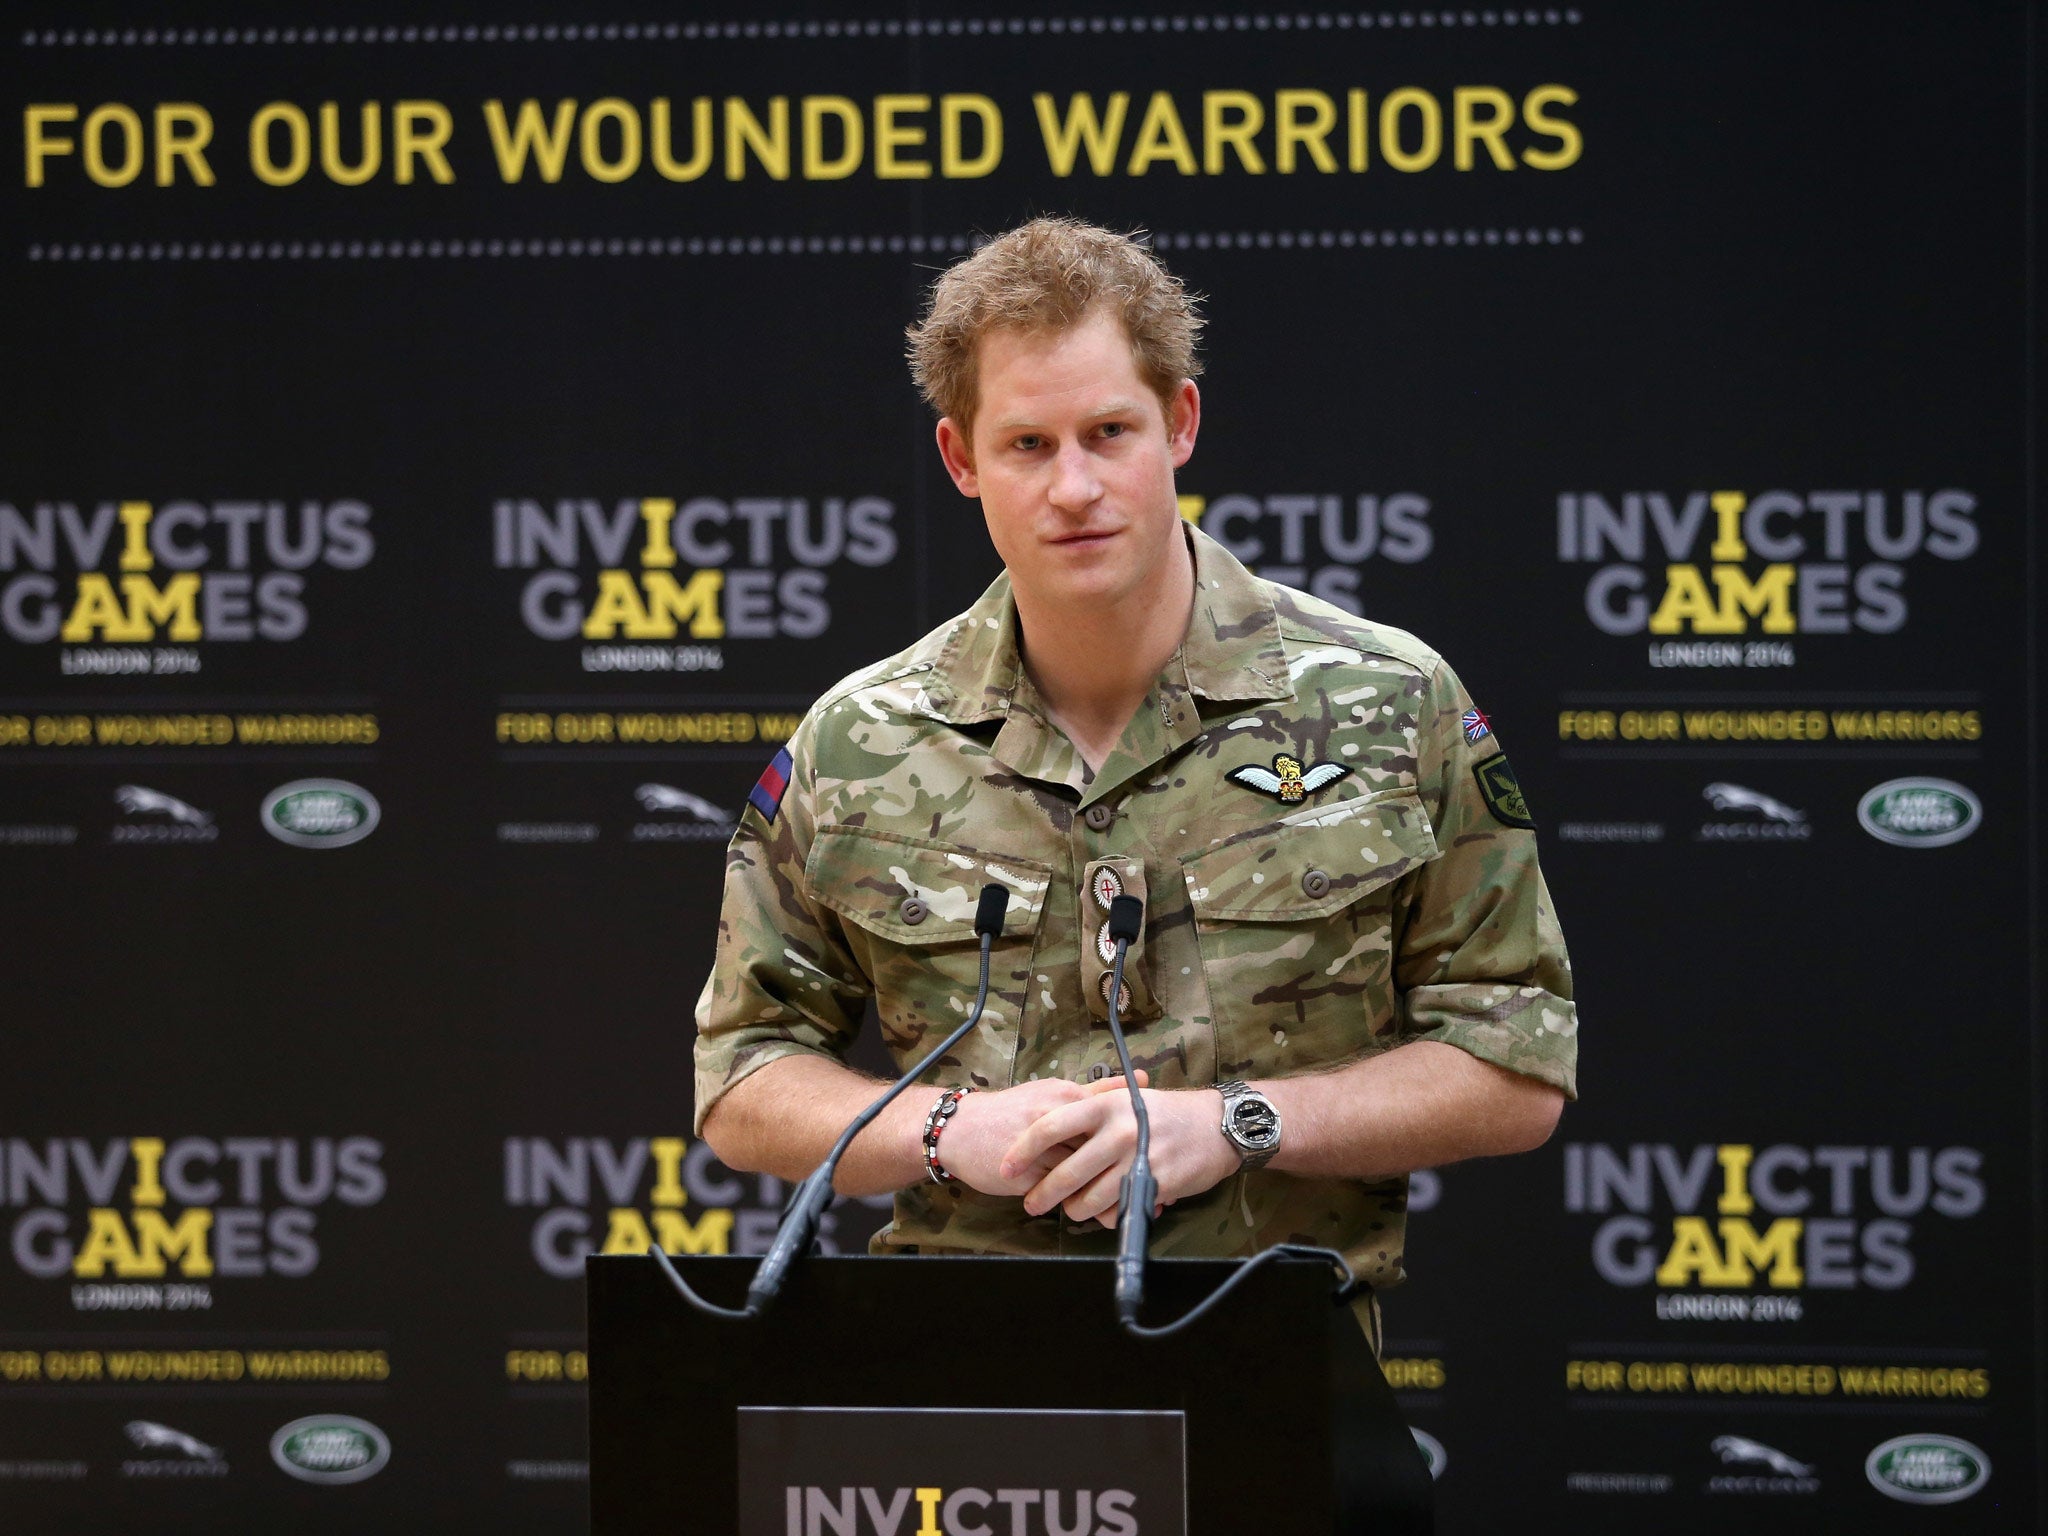 Prince Harry pictured at the launch of the Invictus Games